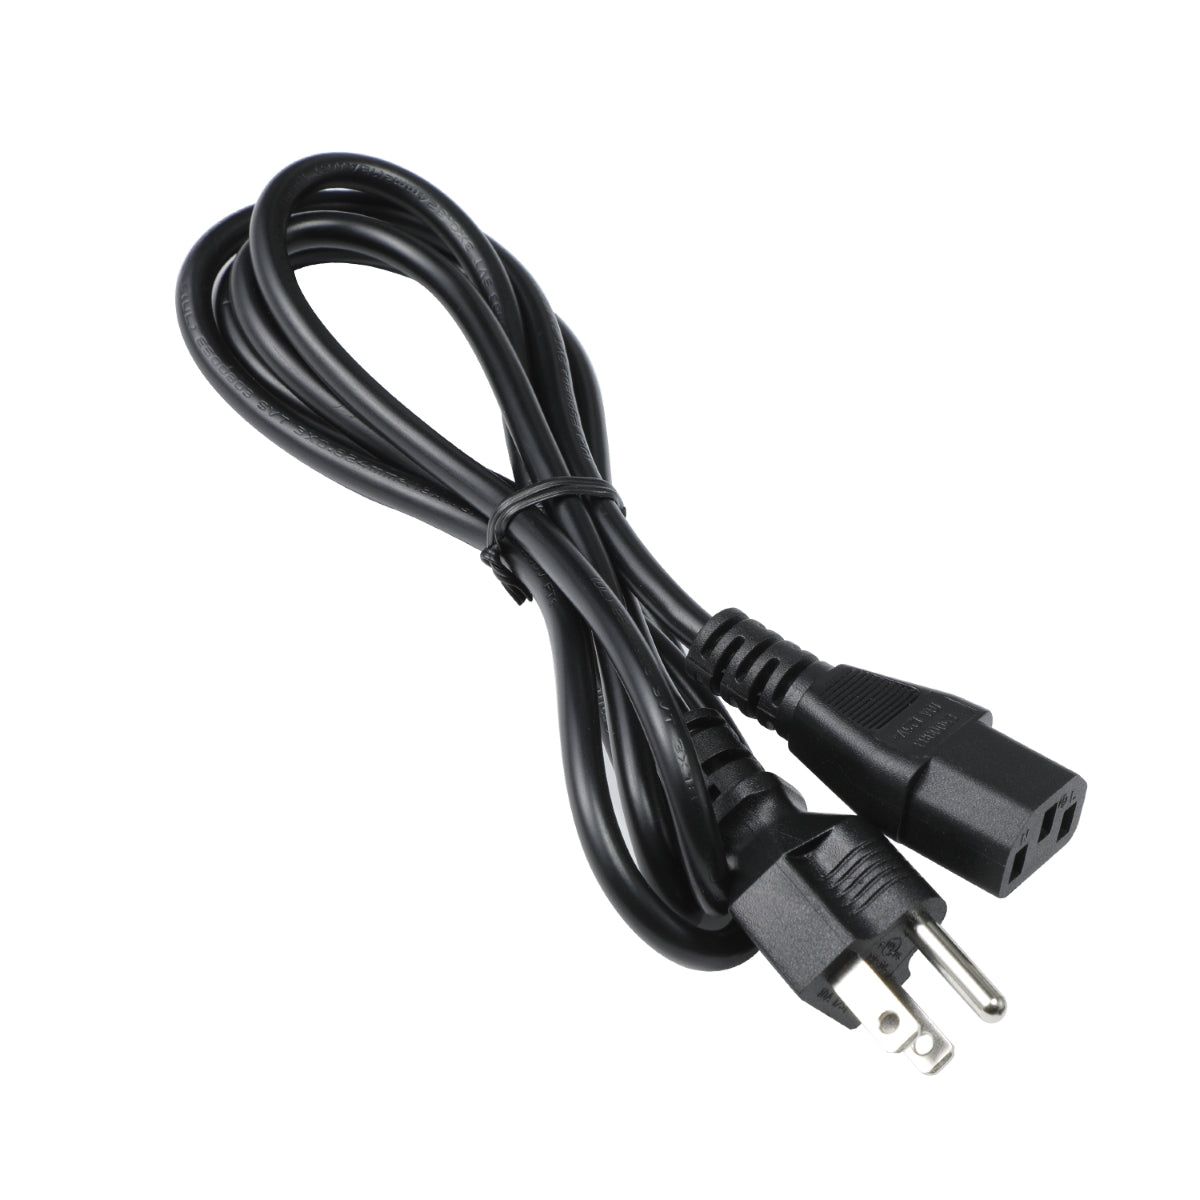 Power Cord for ASUS VE248H Monitor.